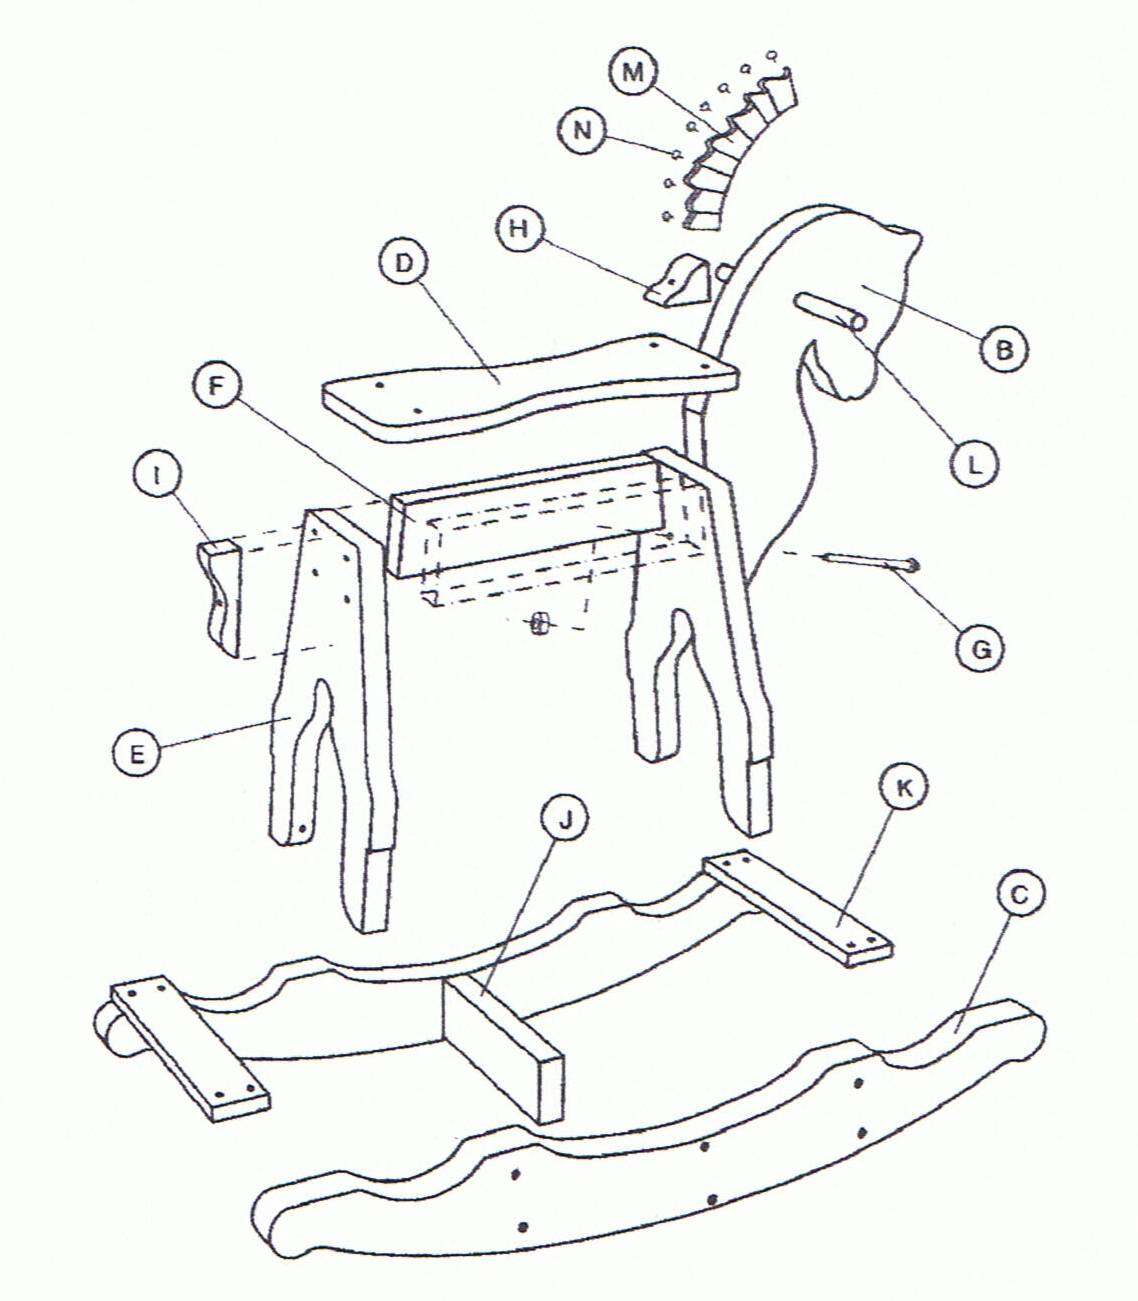 Woodworking Plans For Rocking Horse